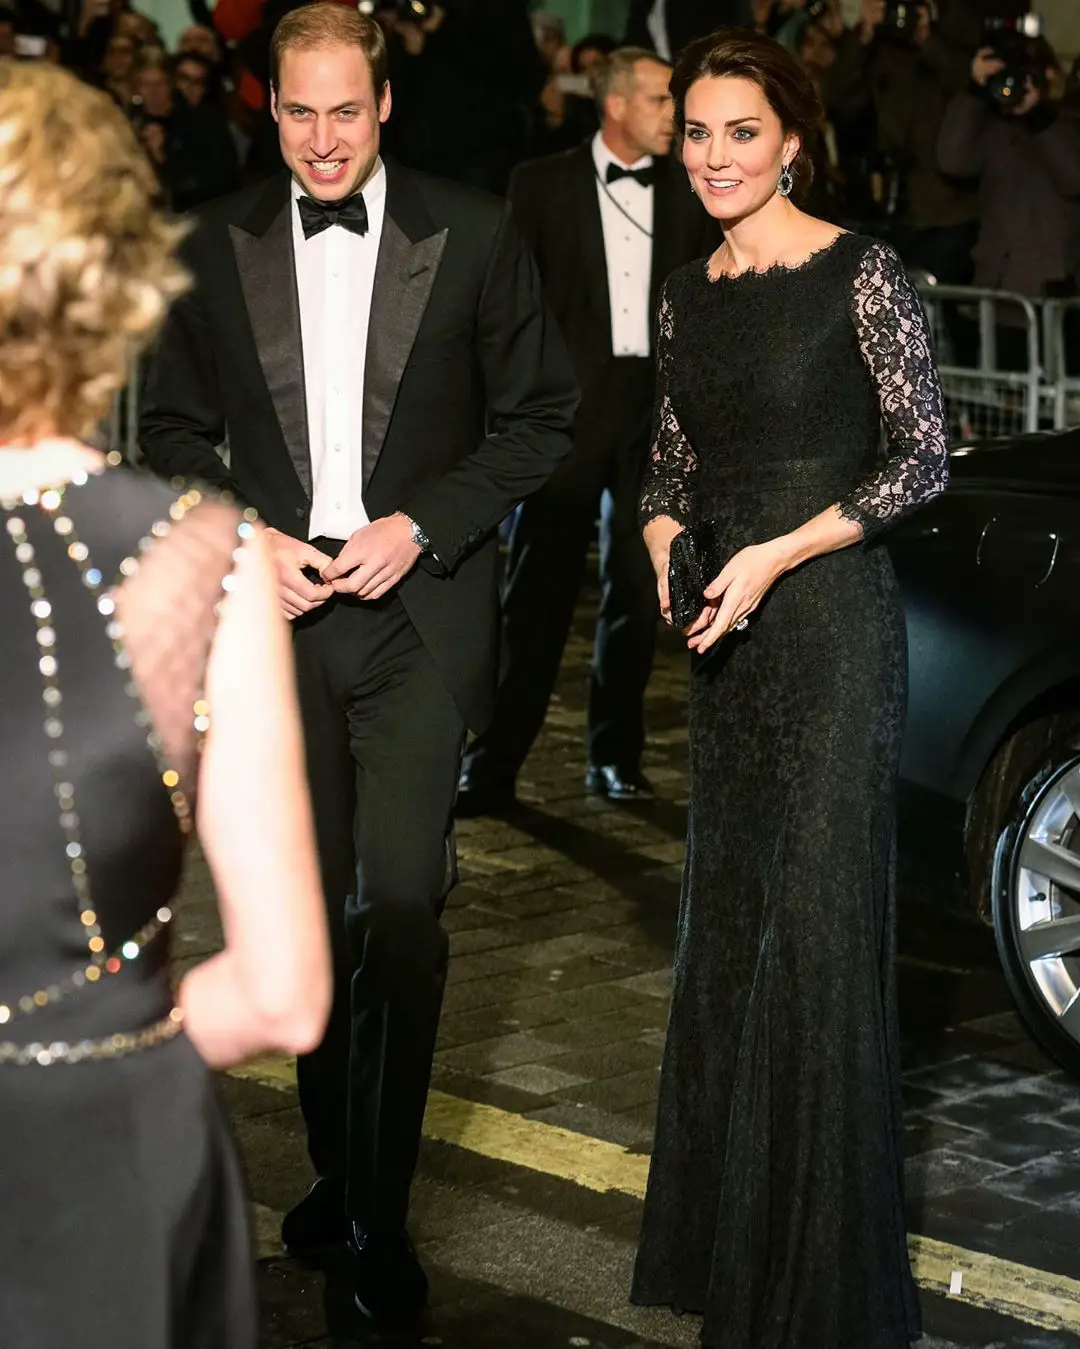 Duke and Duchess of Cambridge attended Royal Variety Performance in November 2014